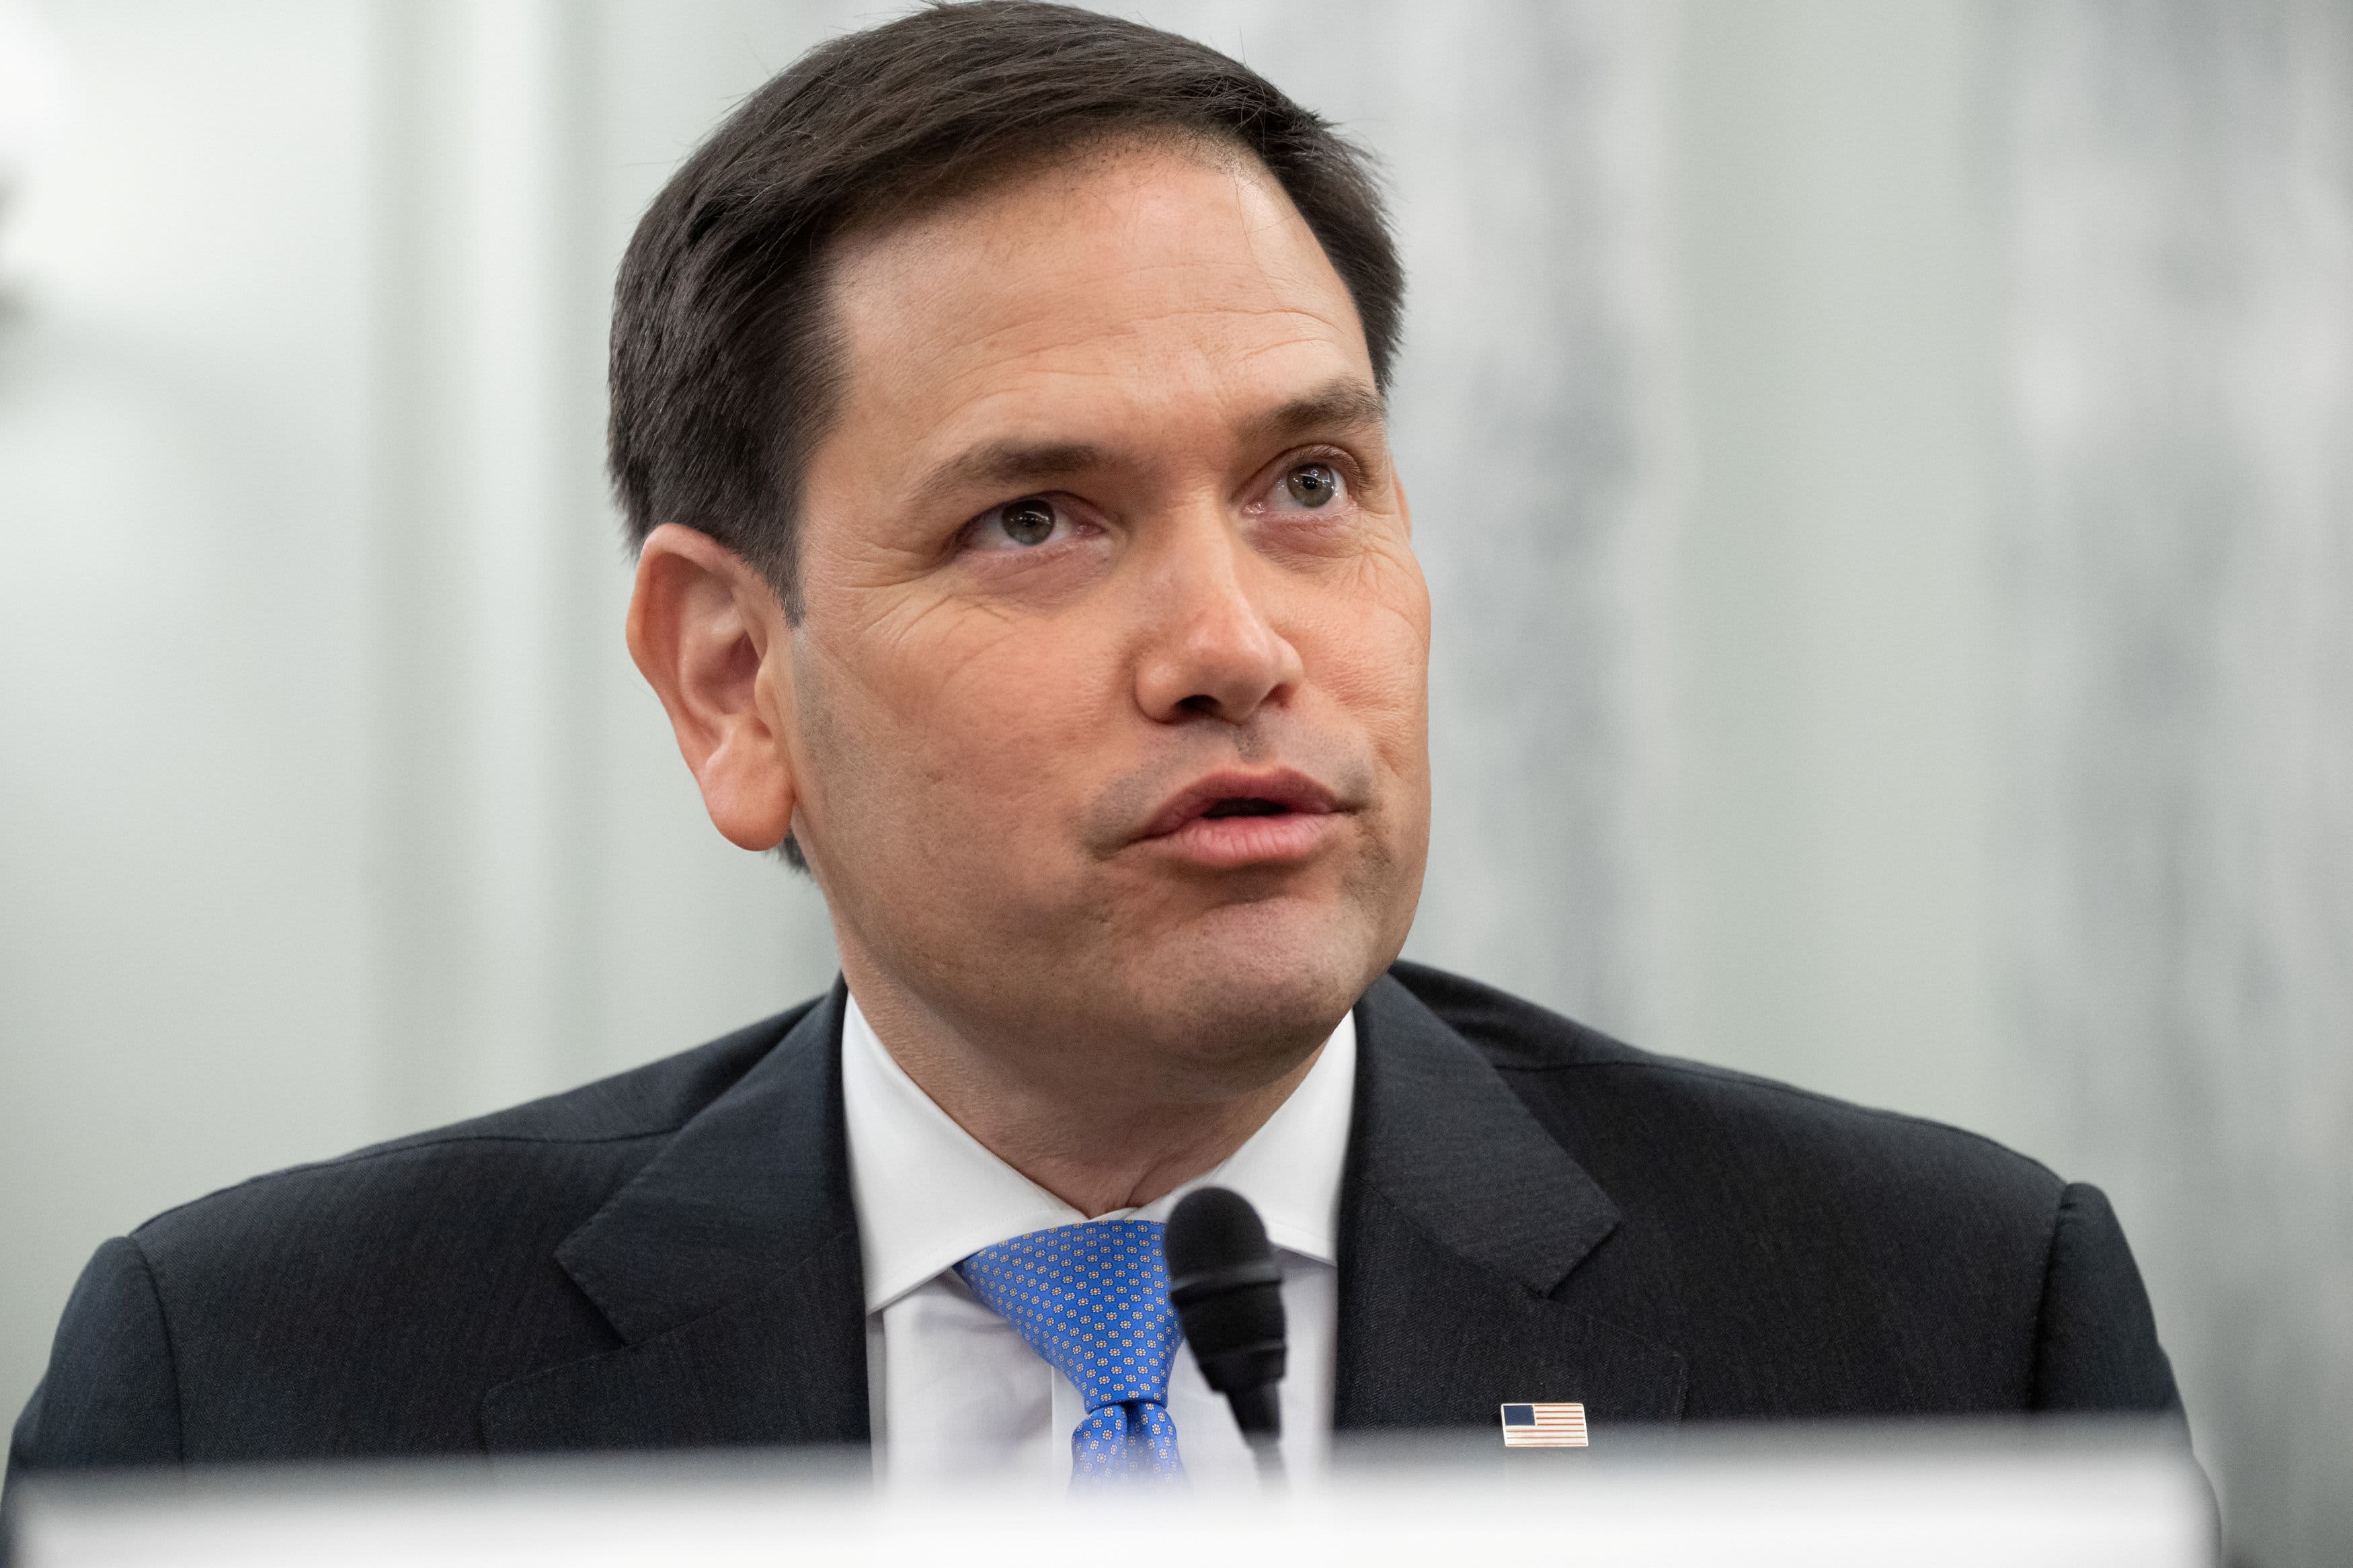 GOP’s Marco Rubio says the U.S. should target Russian oil while boosting its own..